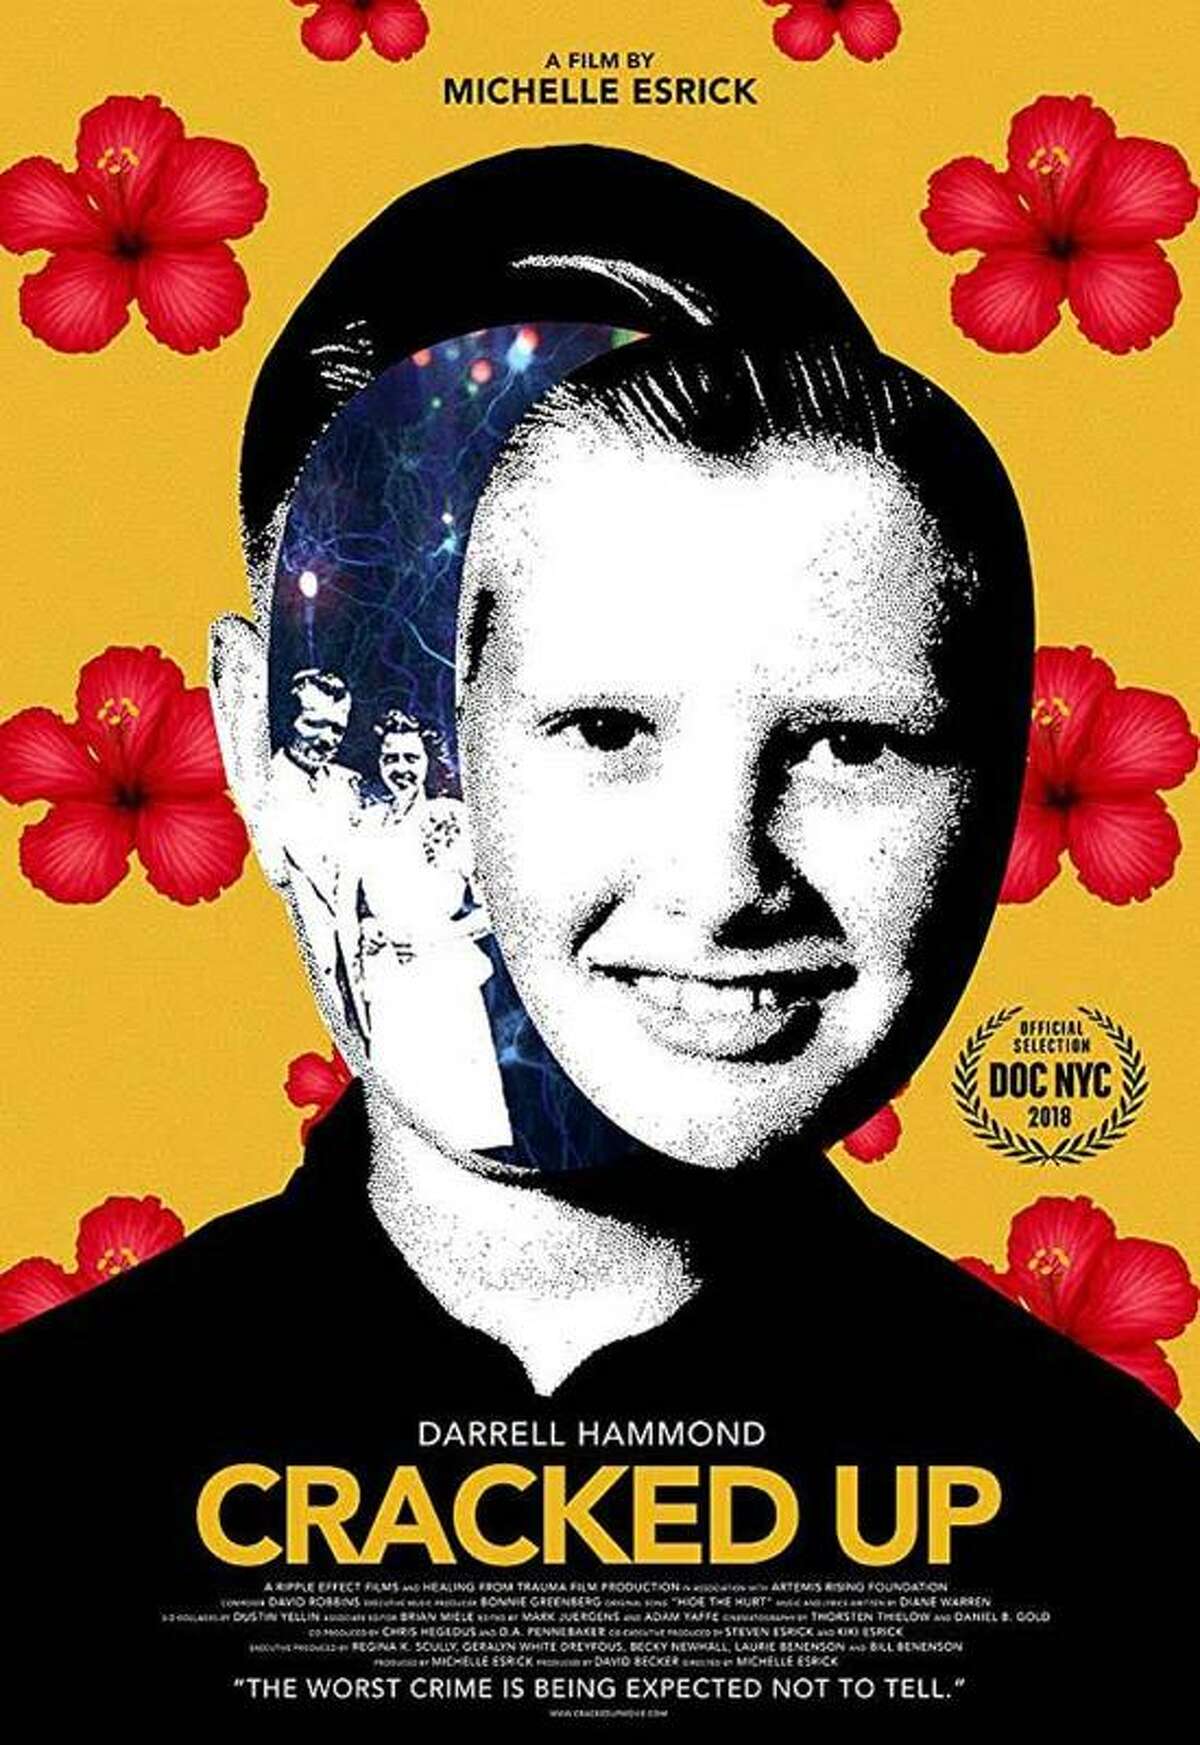 Director Michelle Esrick’s award-winning documentary “Cracked Up” explores the impact that childhood trauma can have across a lifetime through the story of comedian, actor and “Saturday Night Live” legend Darrell Hammond.